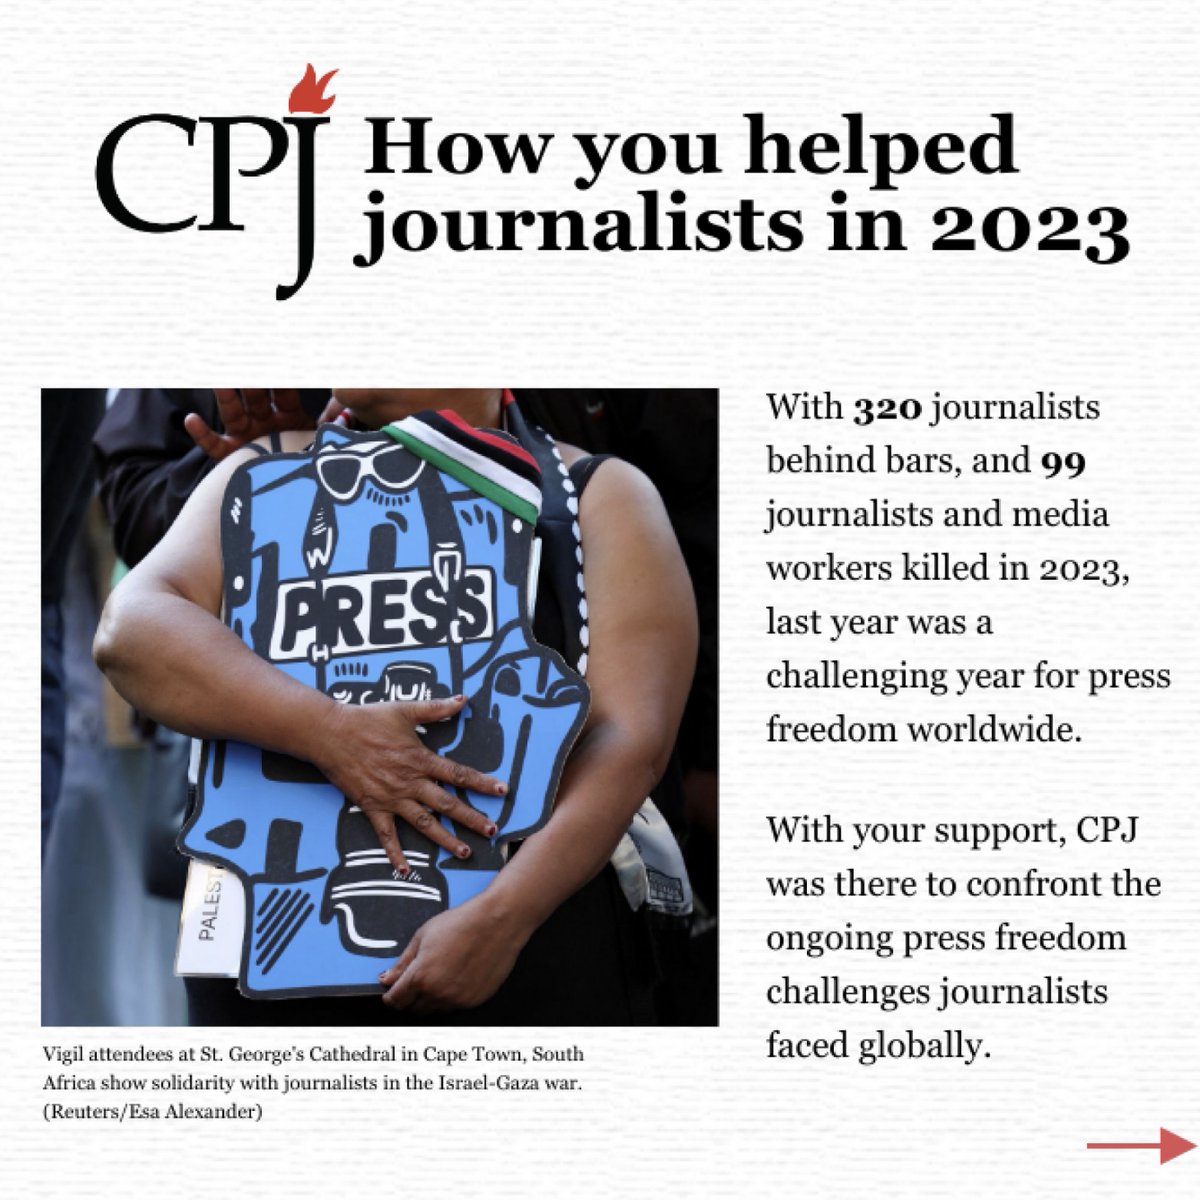 CPJ celebrated the early release of *at least* 200 journalists from behind bars last year.

583 journalists from 59 countries received financial & non-financial assistance.

Join us as we continue to defend #pressfreedom this year & beyond.

Donate to CPJ: cpj.org/WPFD-donate